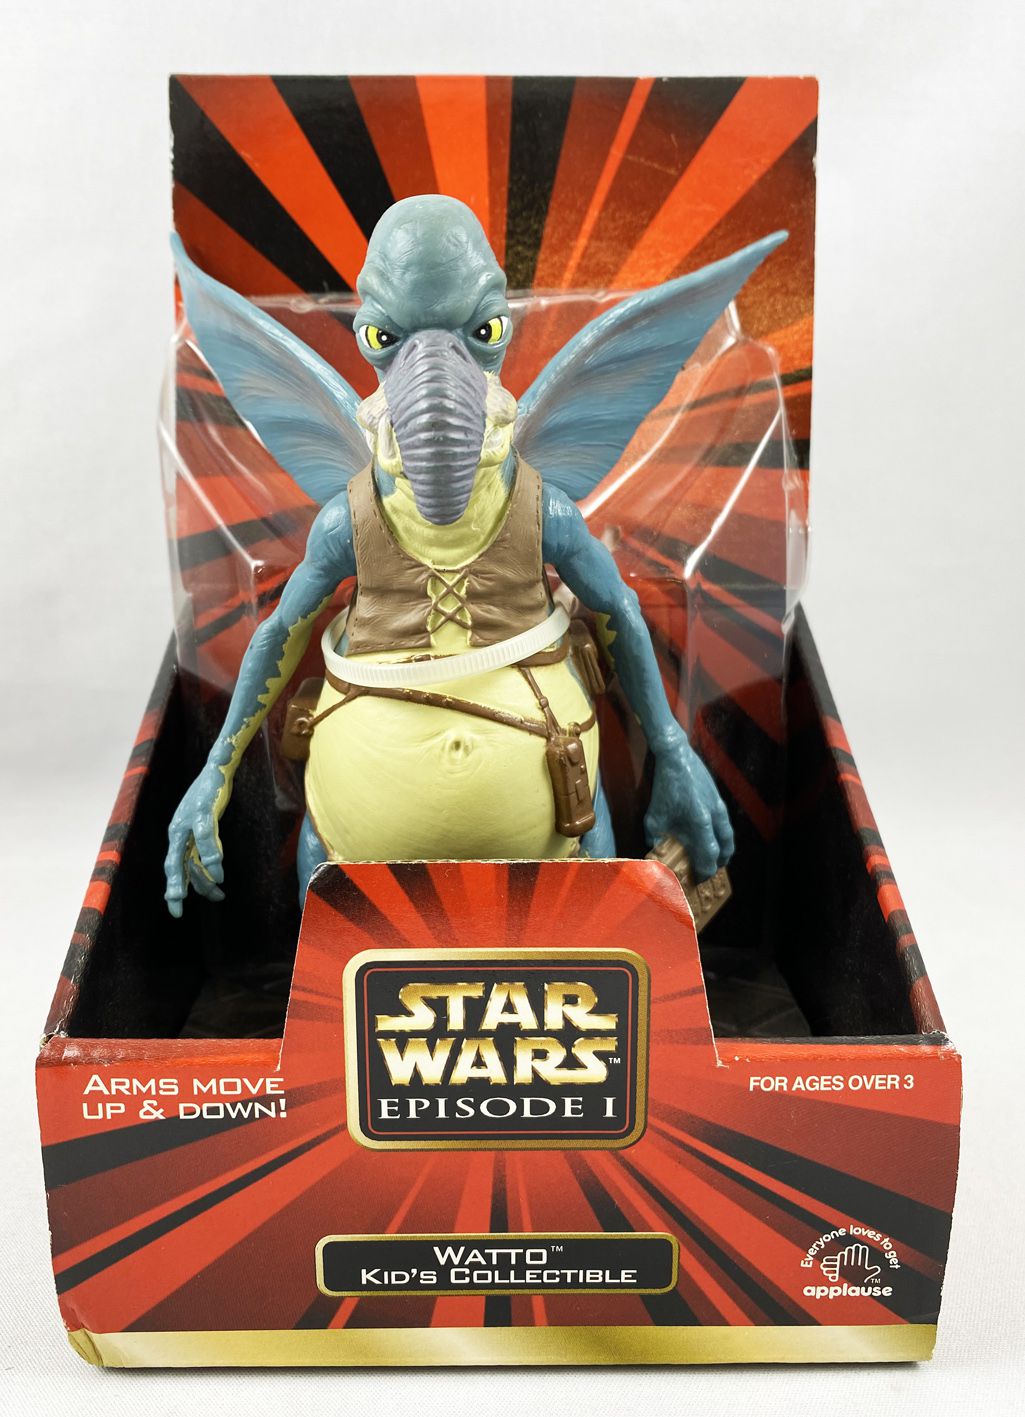 Star Wars Episode 1 Watto Kids Collectible Action Figure Applause 3 for sale online 